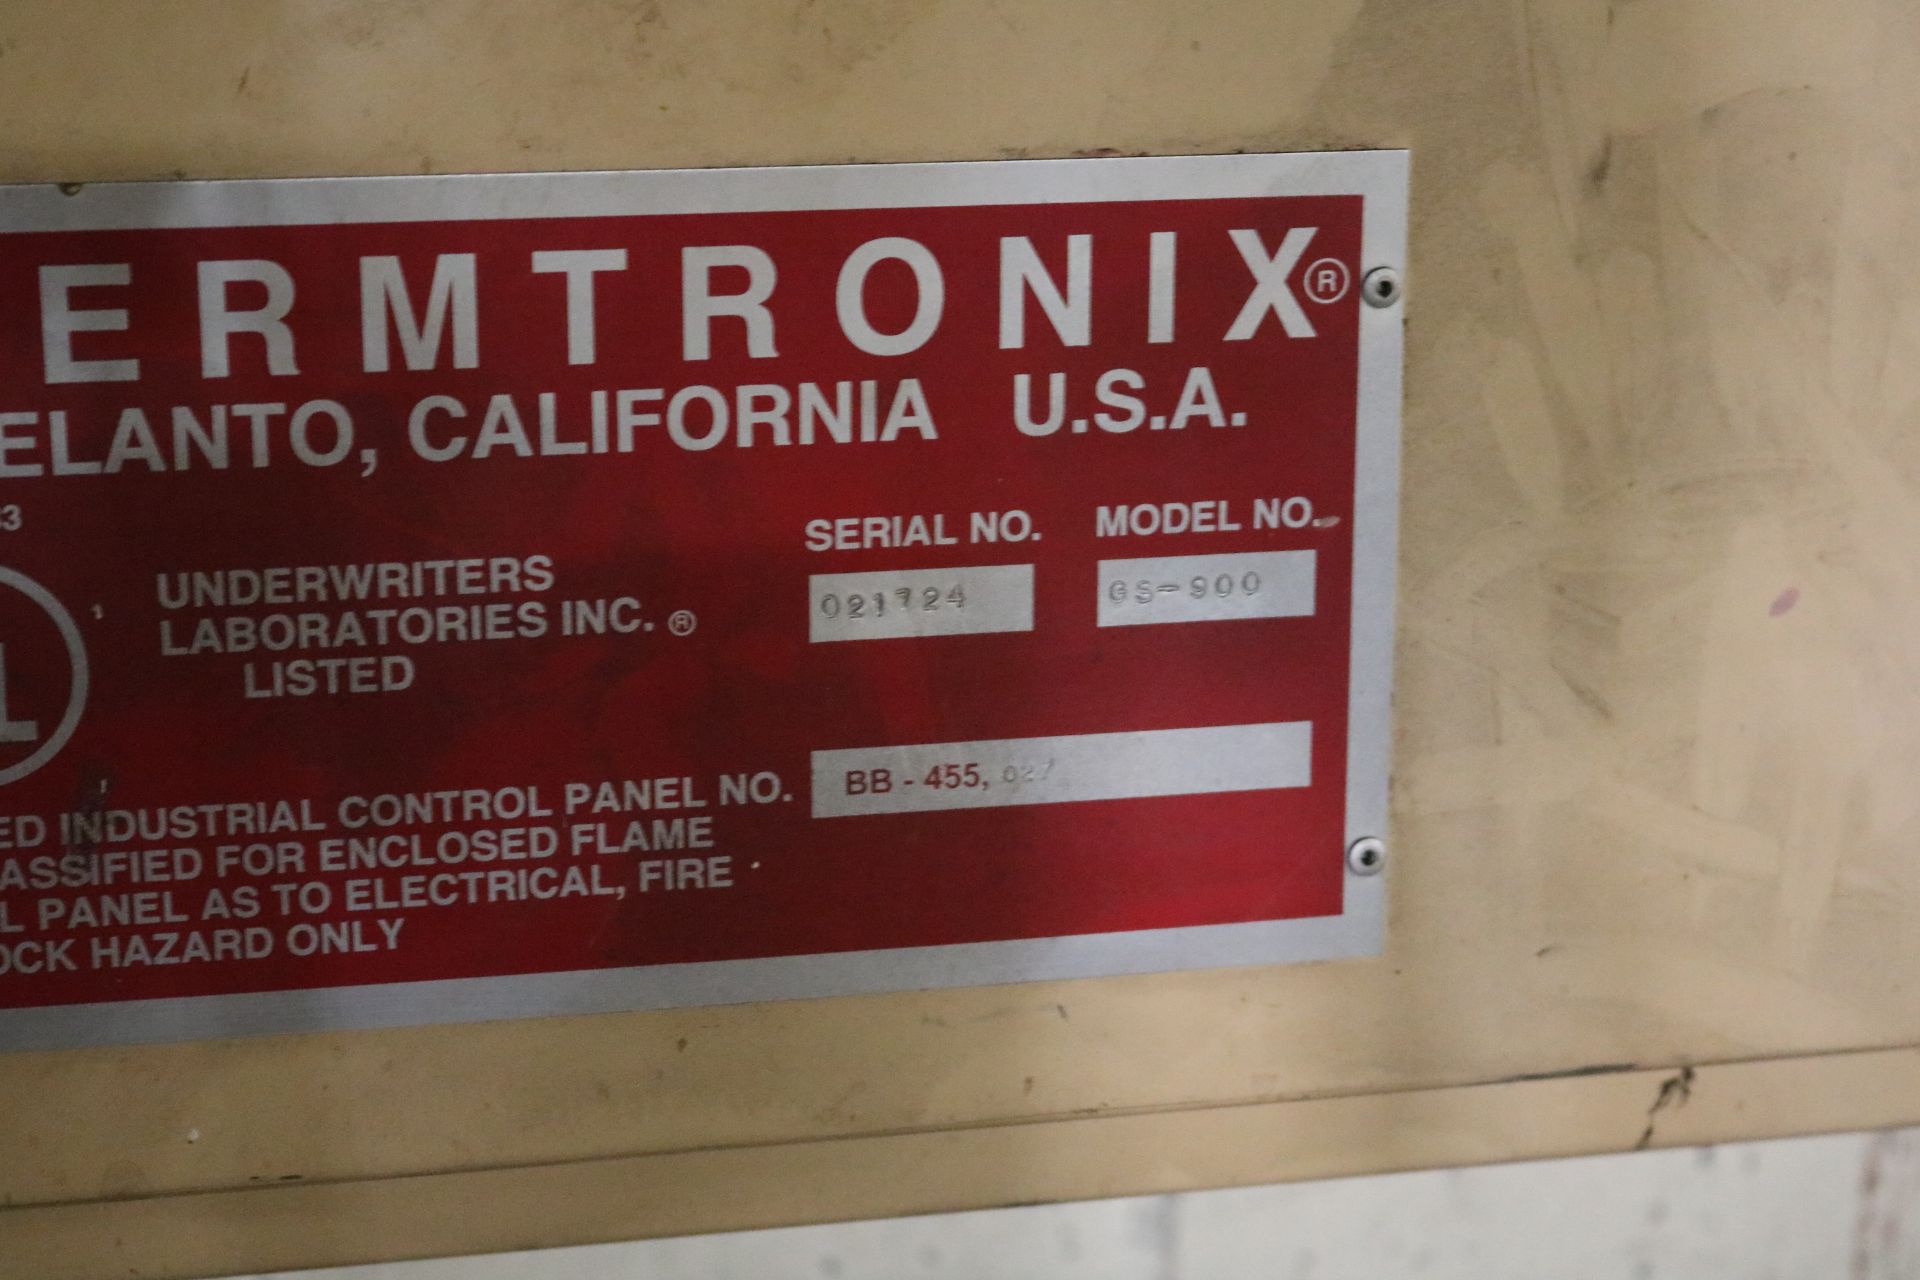 2002 THERMTRONIX MODEL GS900 900 LB GAS FRIED MELTING FURNACE, GAS SYSTEM AND CONTROLS, S/N 021724 - Image 7 of 9